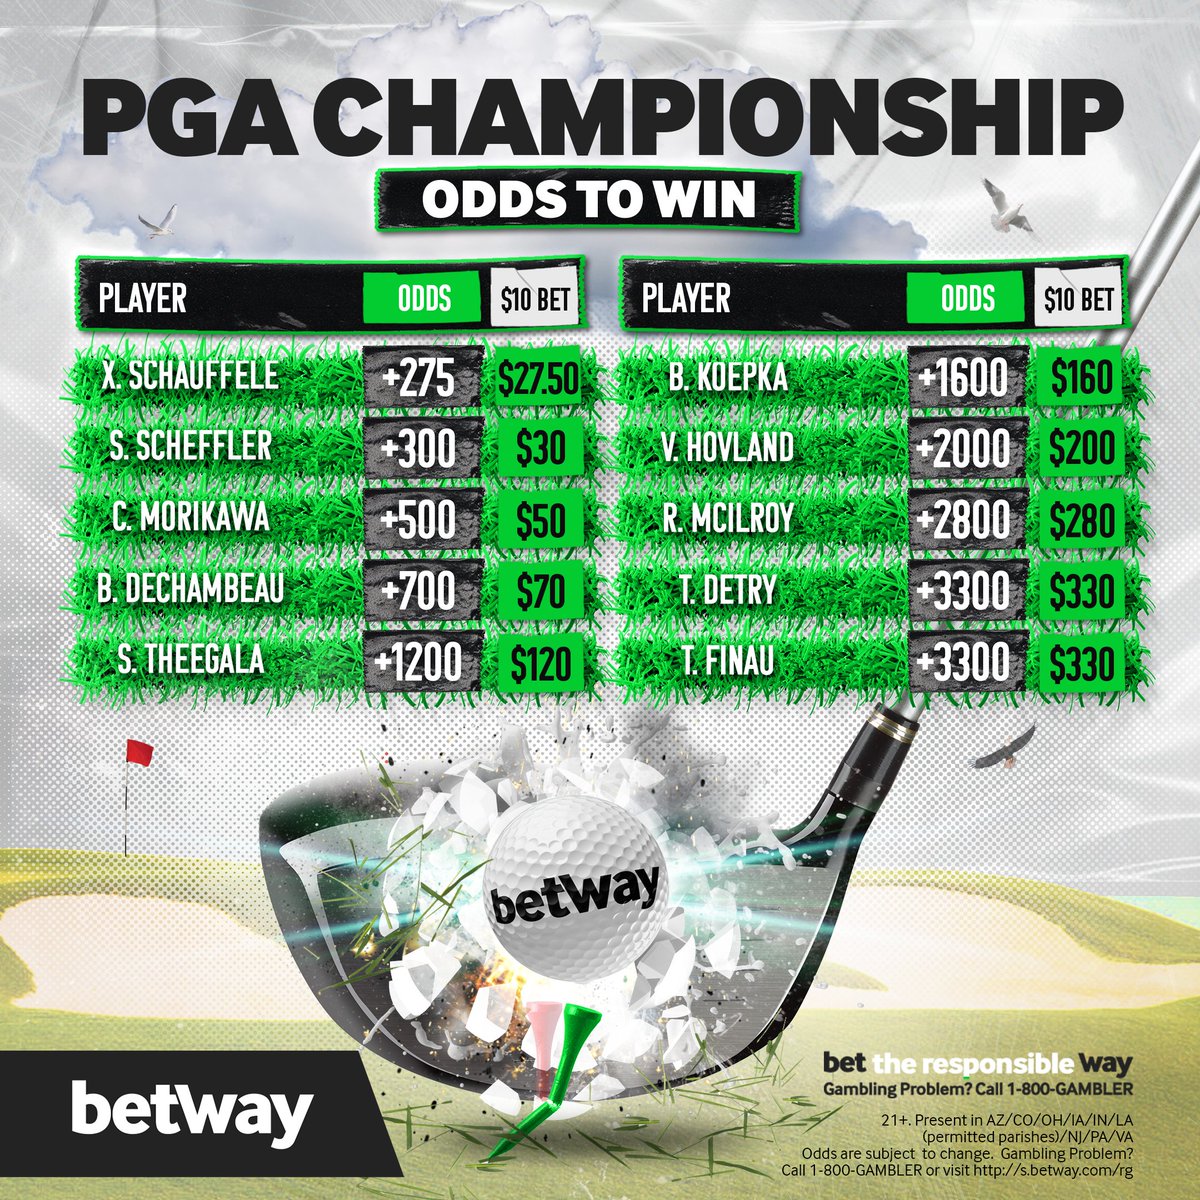 💰 Odds to win the PGA Championship ⛳️ We got a STACKED leaderboard going into the weekend at Valhalla 🍿